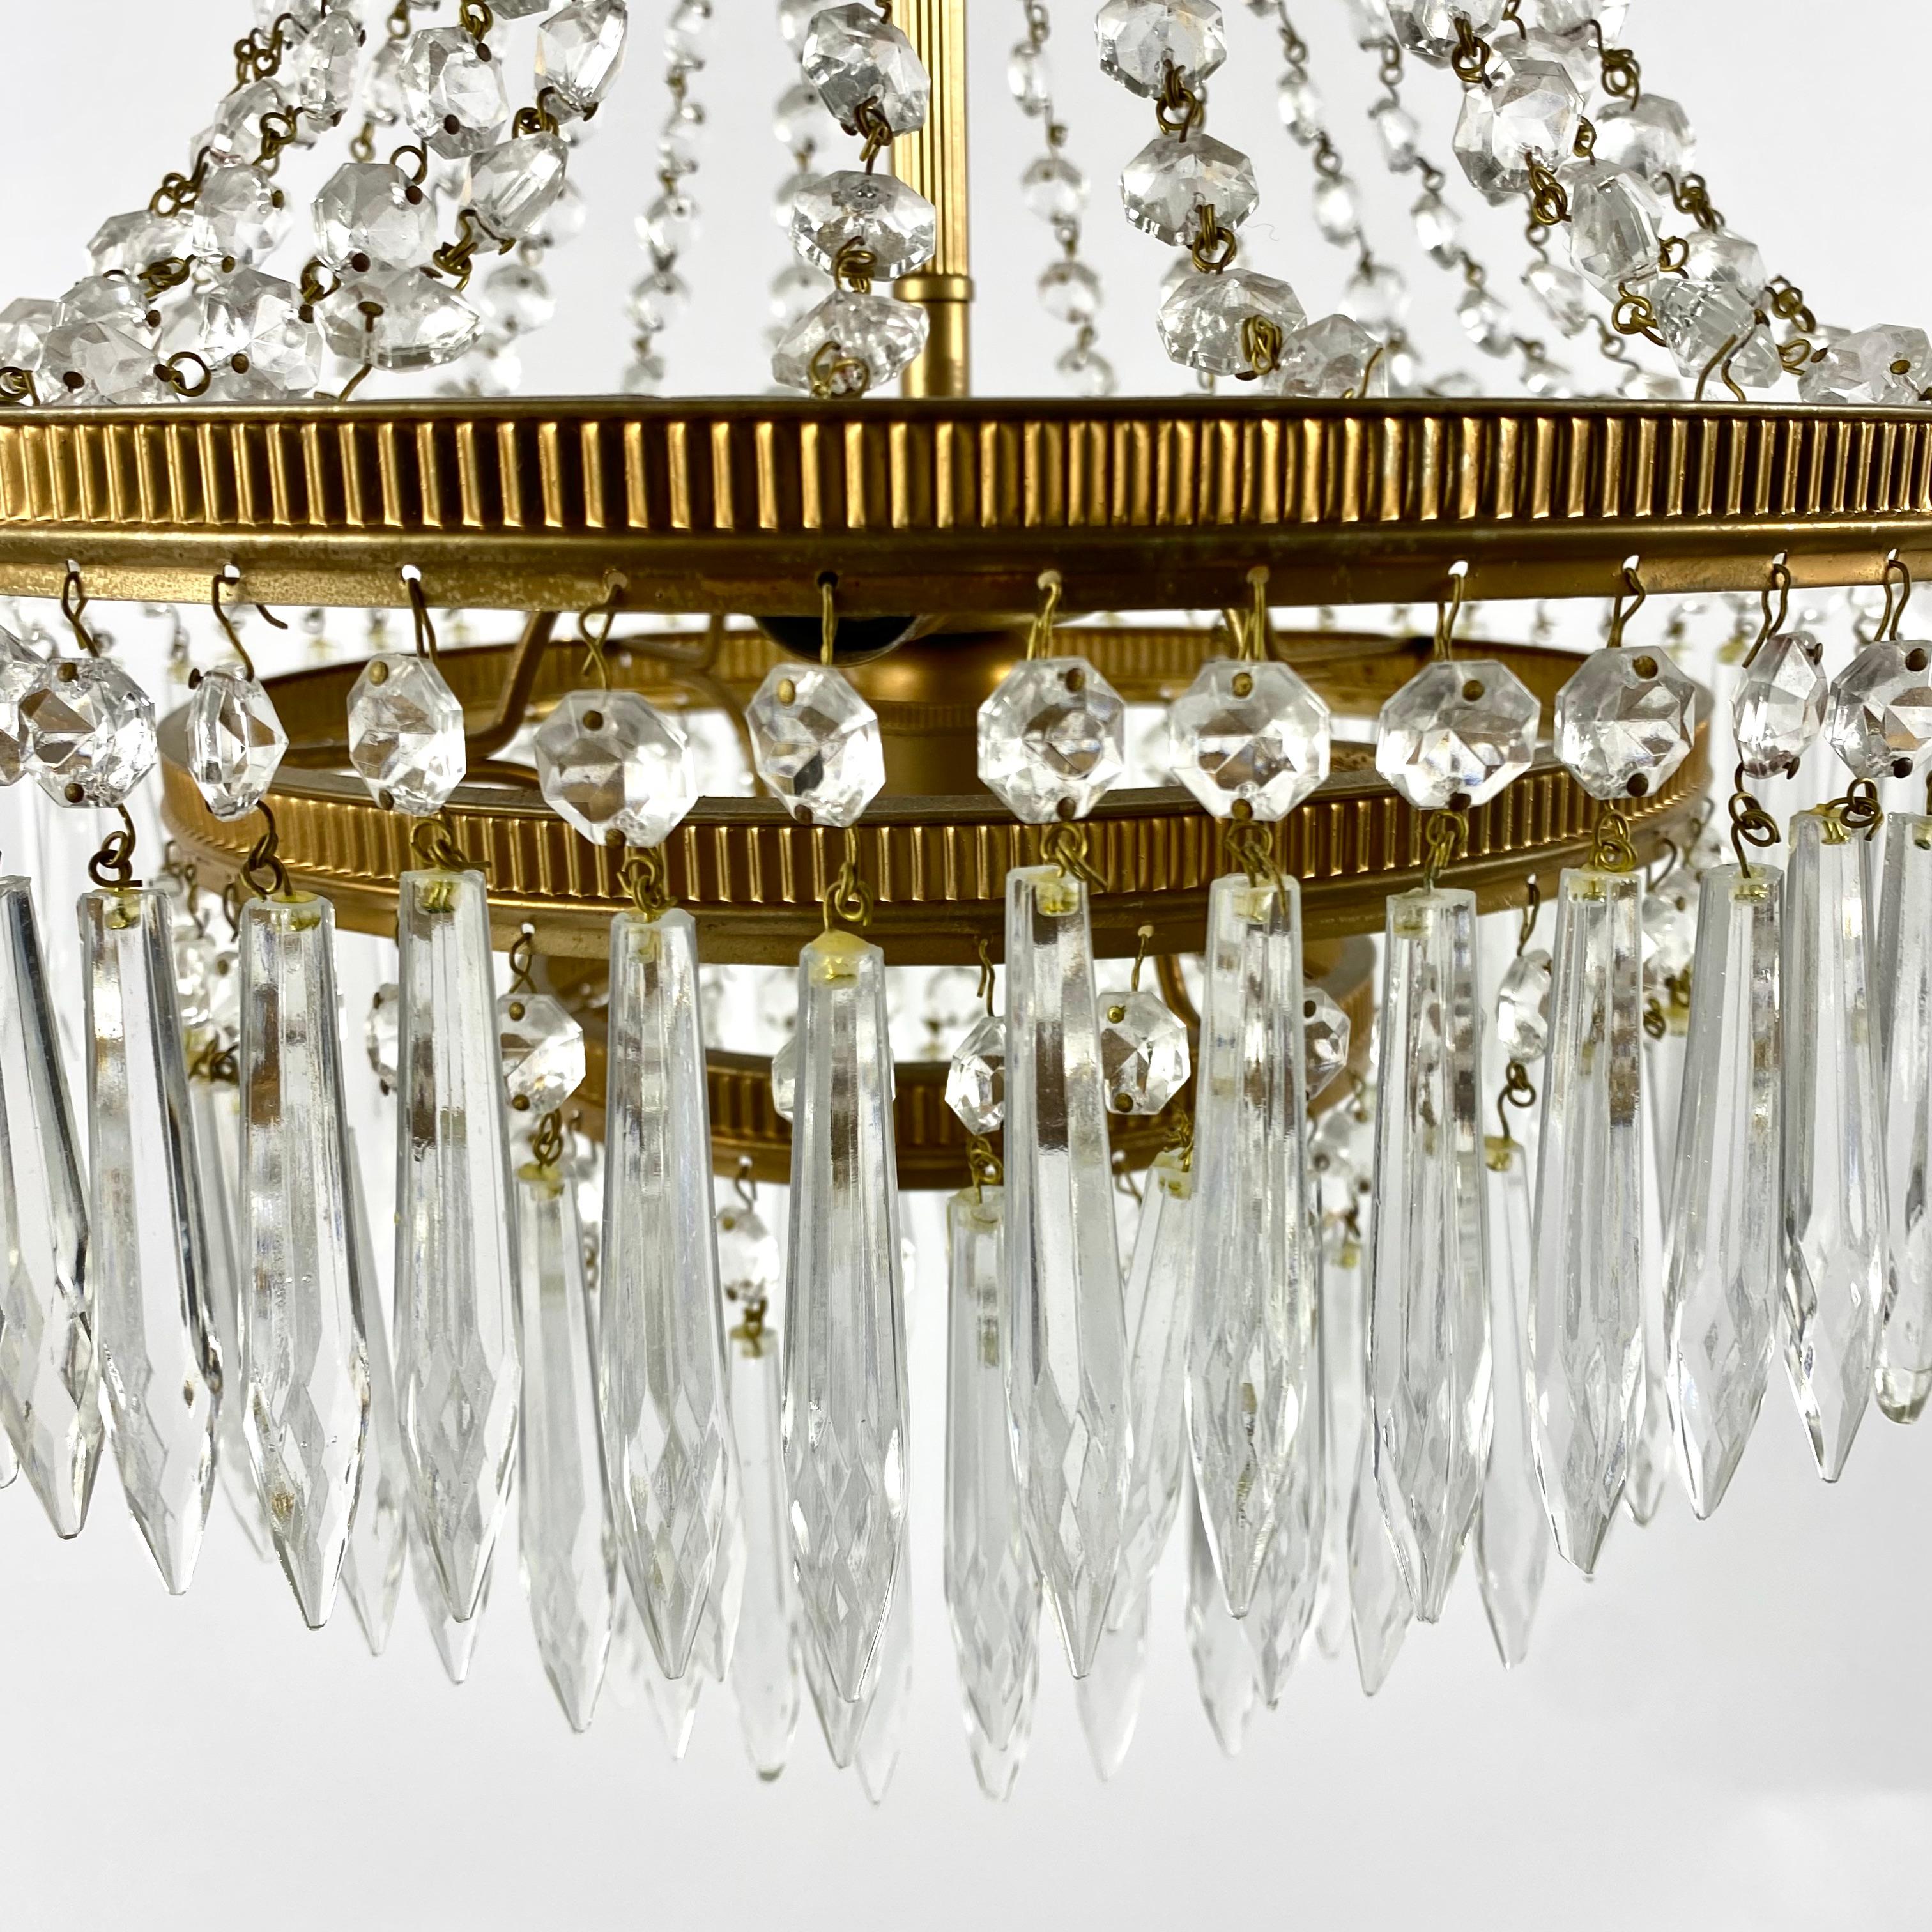 Chandelier Vintage Crystal Brass Pendant Lighting With 3 Light Points, France In Good Condition For Sale In Bastogne, BE